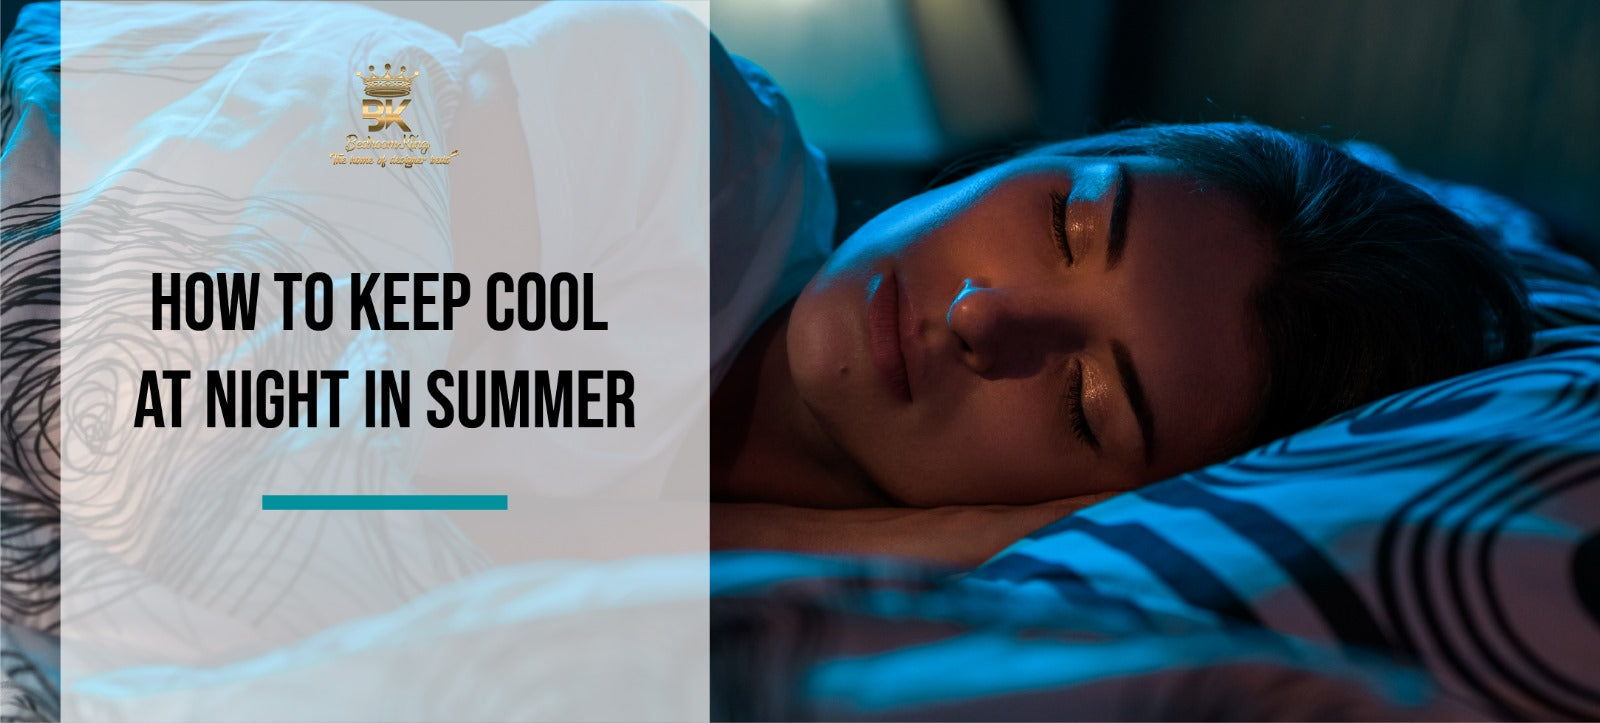 How To Keep Cool On Them Hot Summer Nights